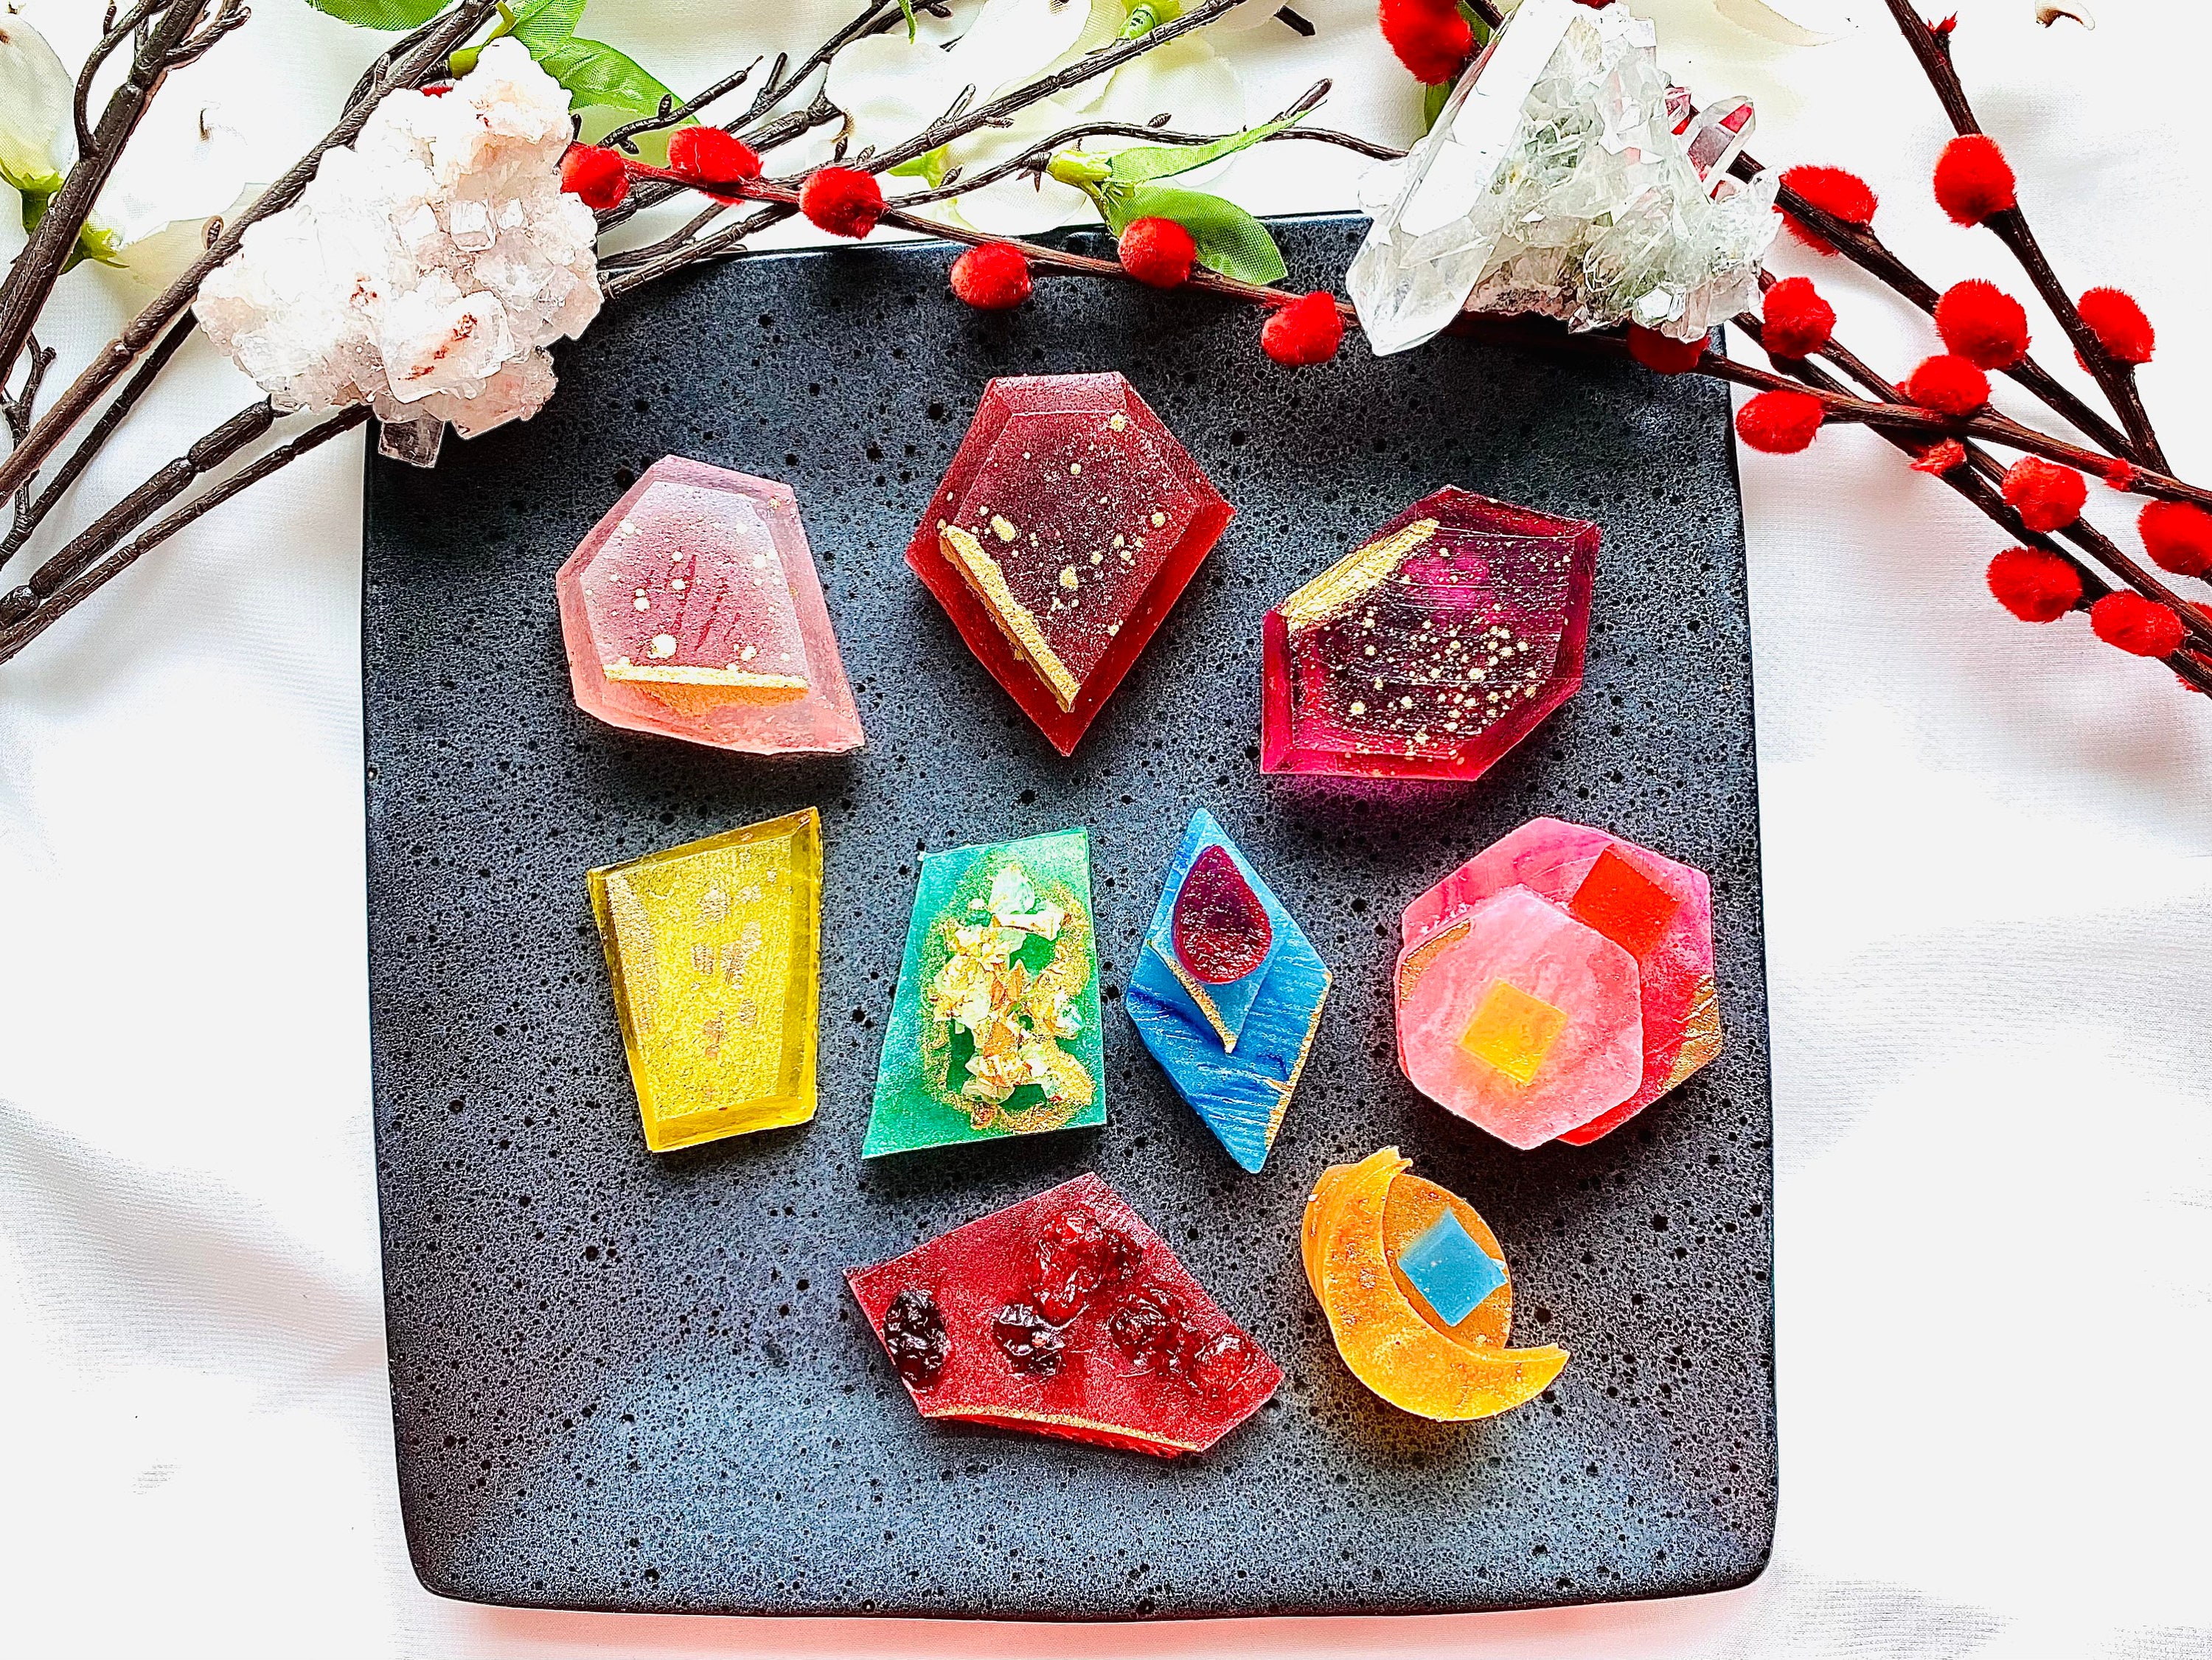 Kohakutou (Japanese crystal candy) Recipe - flavored with Juice